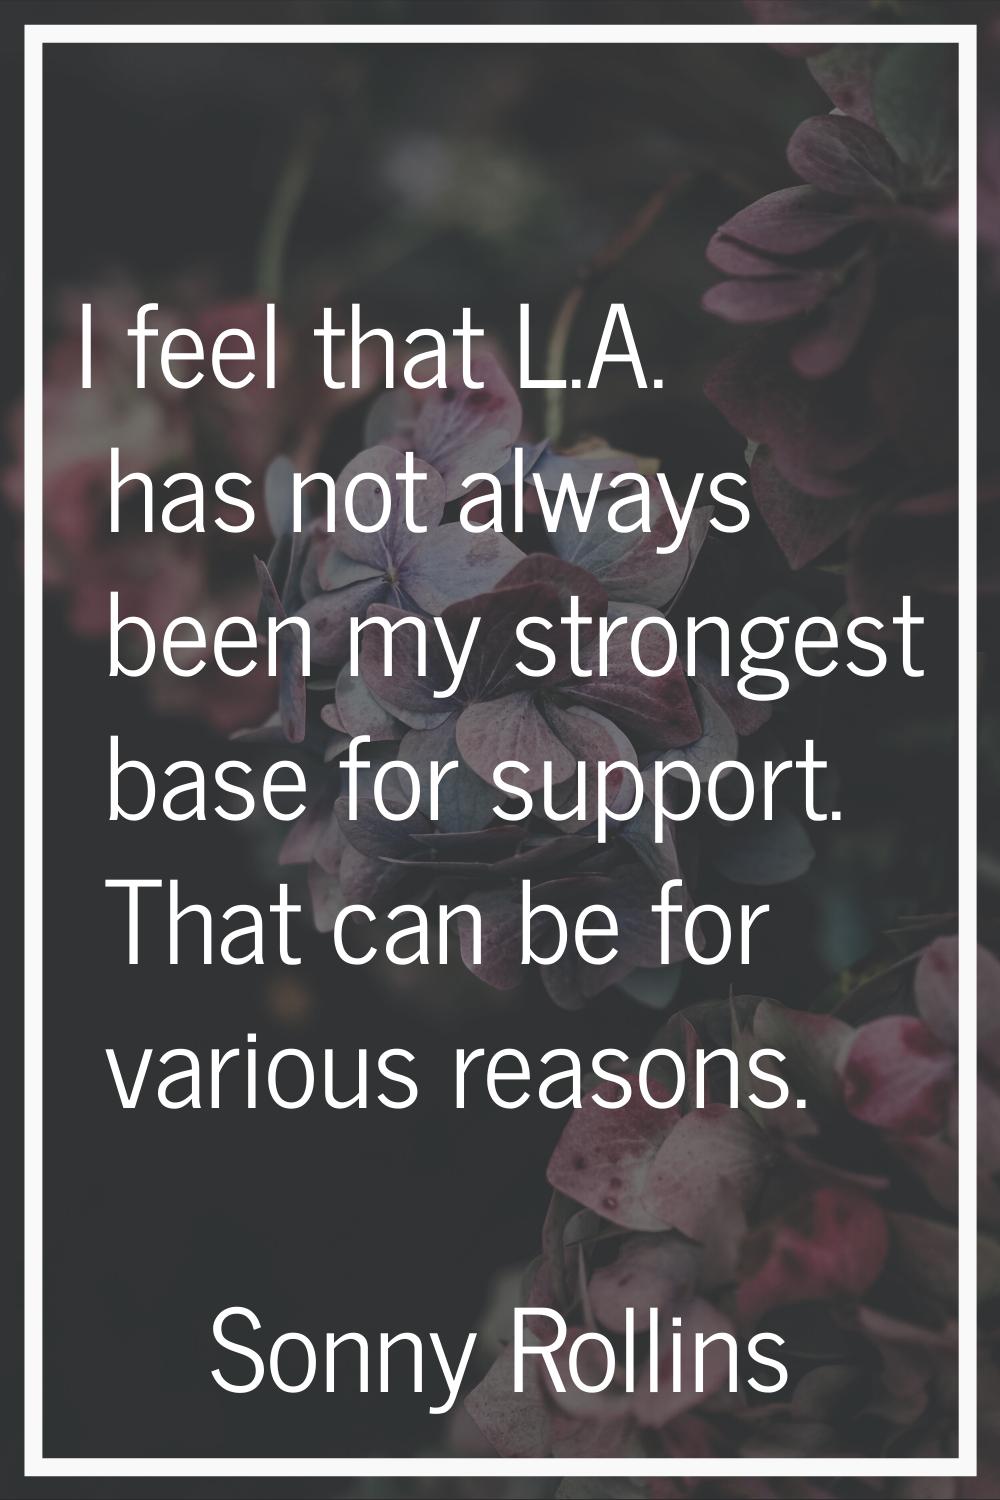 I feel that L.A. has not always been my strongest base for support. That can be for various reasons